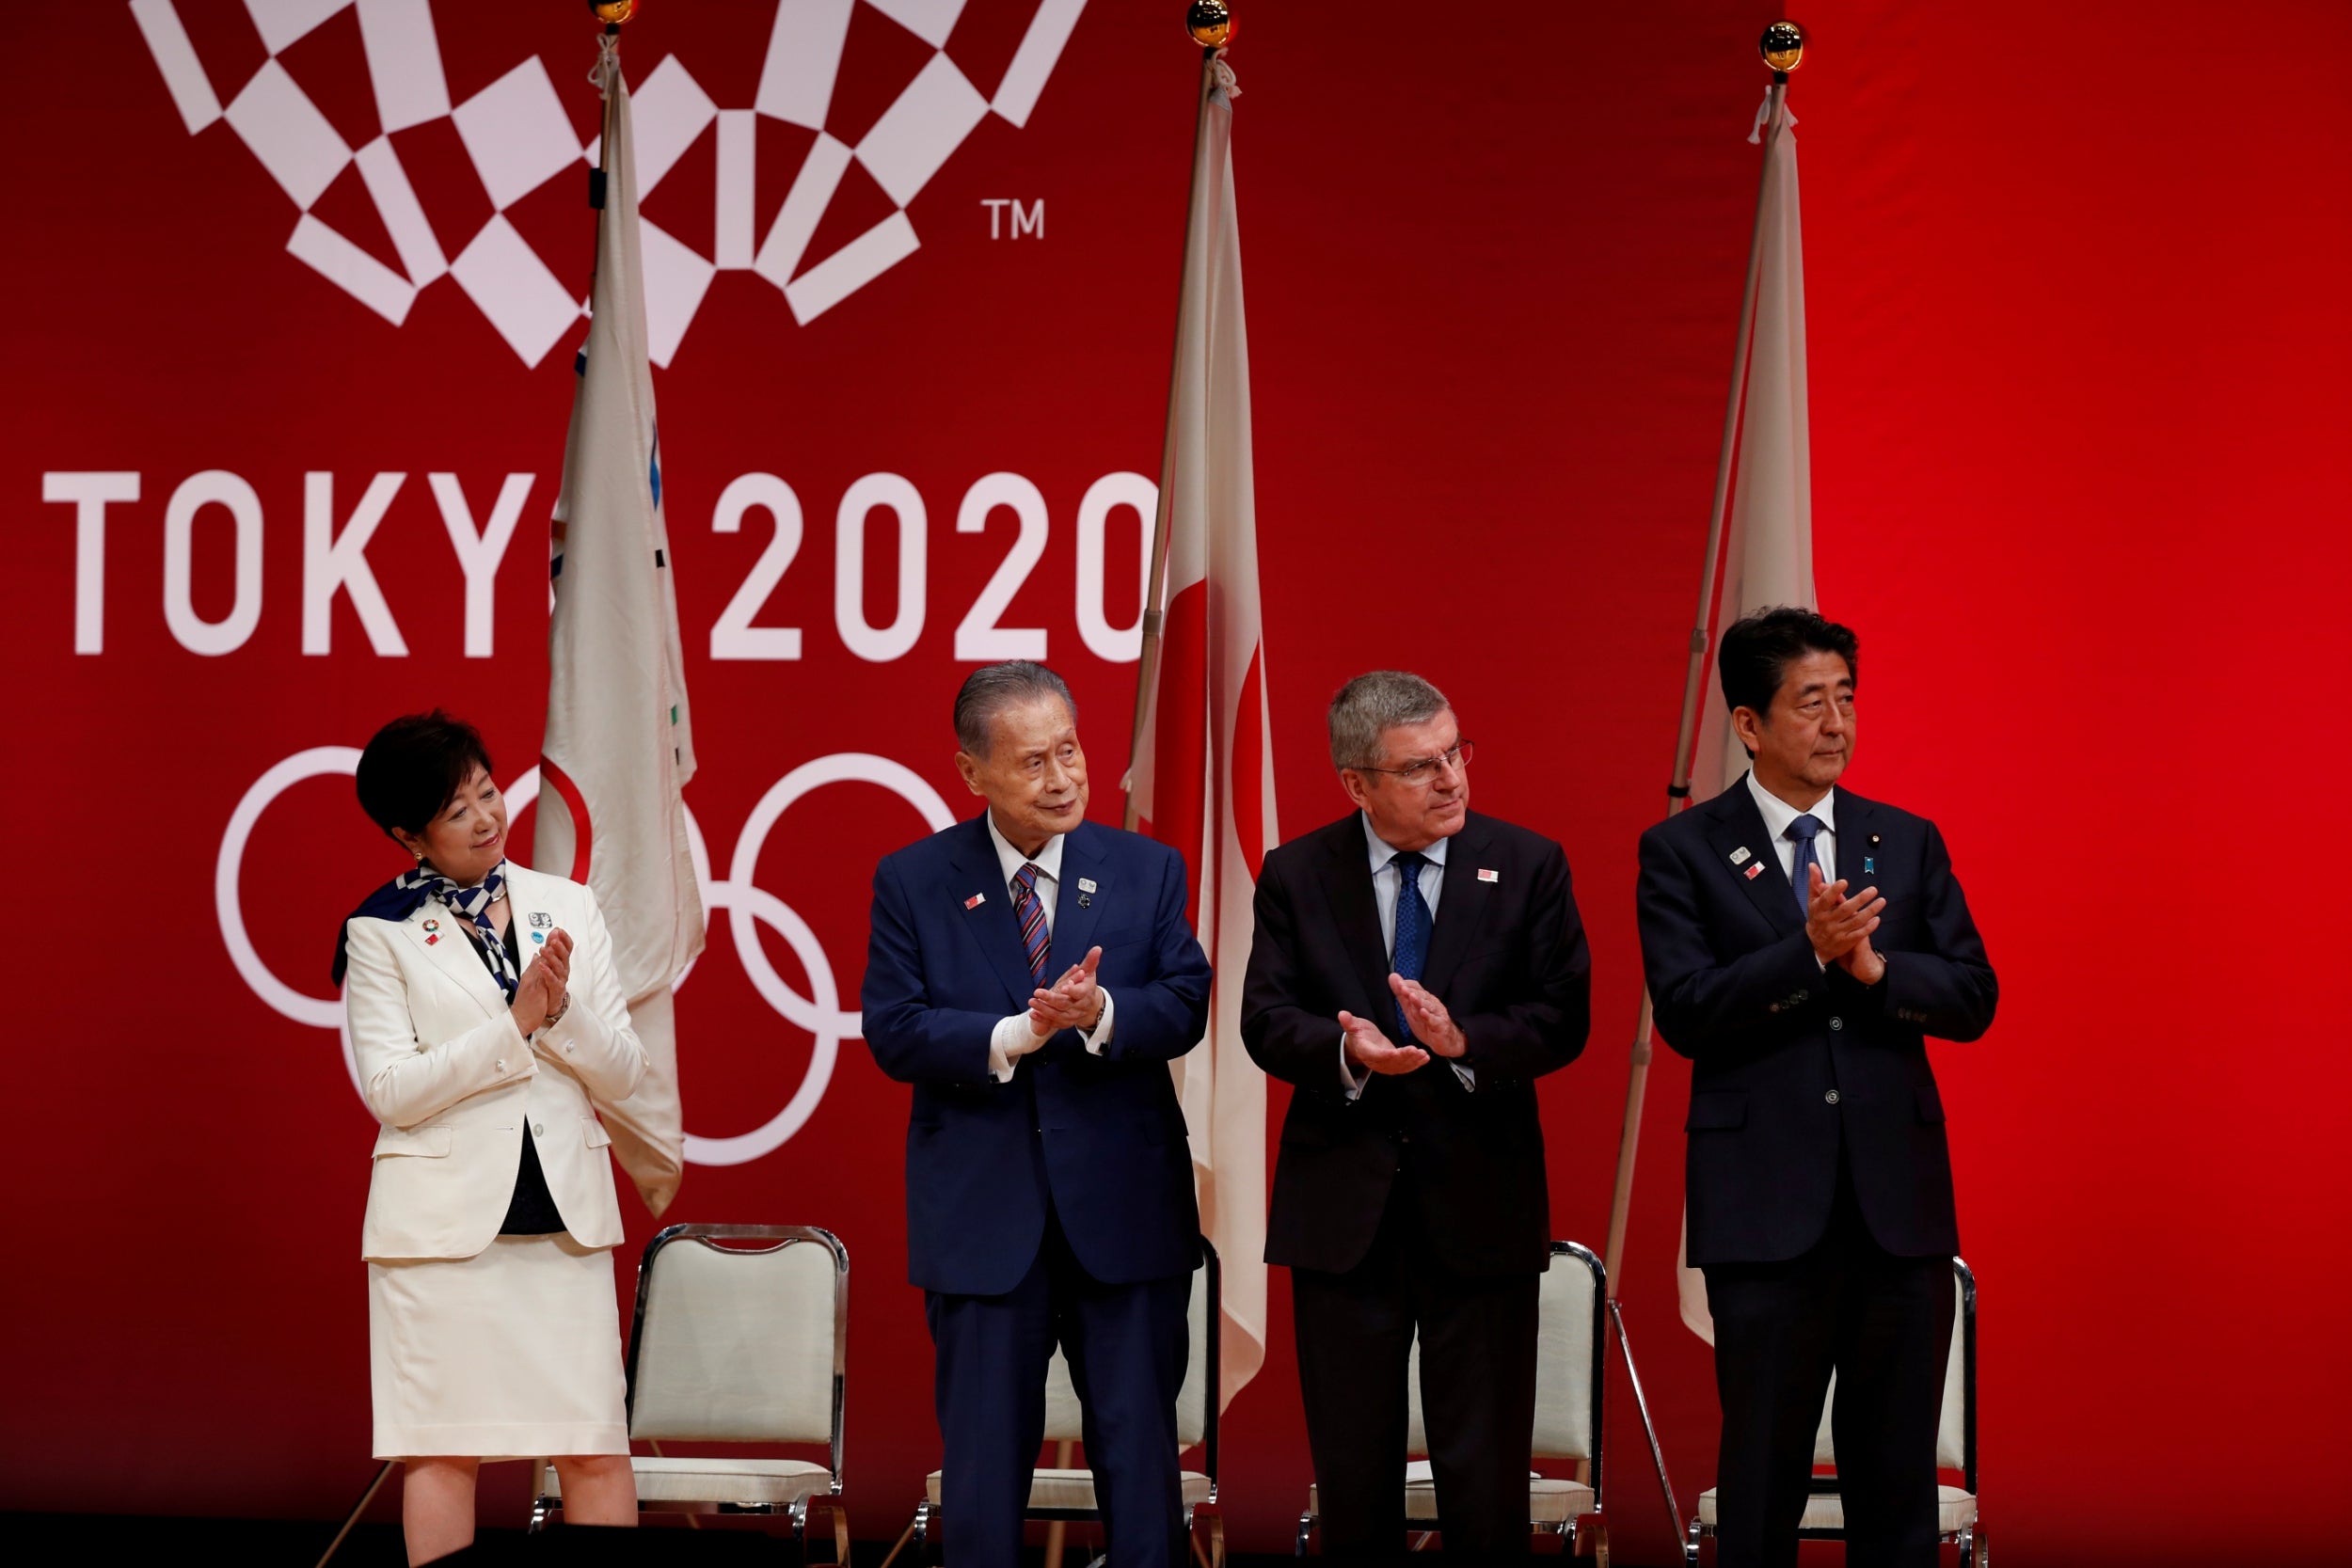 Tokyo 2020 chief Yoshiro Mori (second from left) admits the Games could be postponed